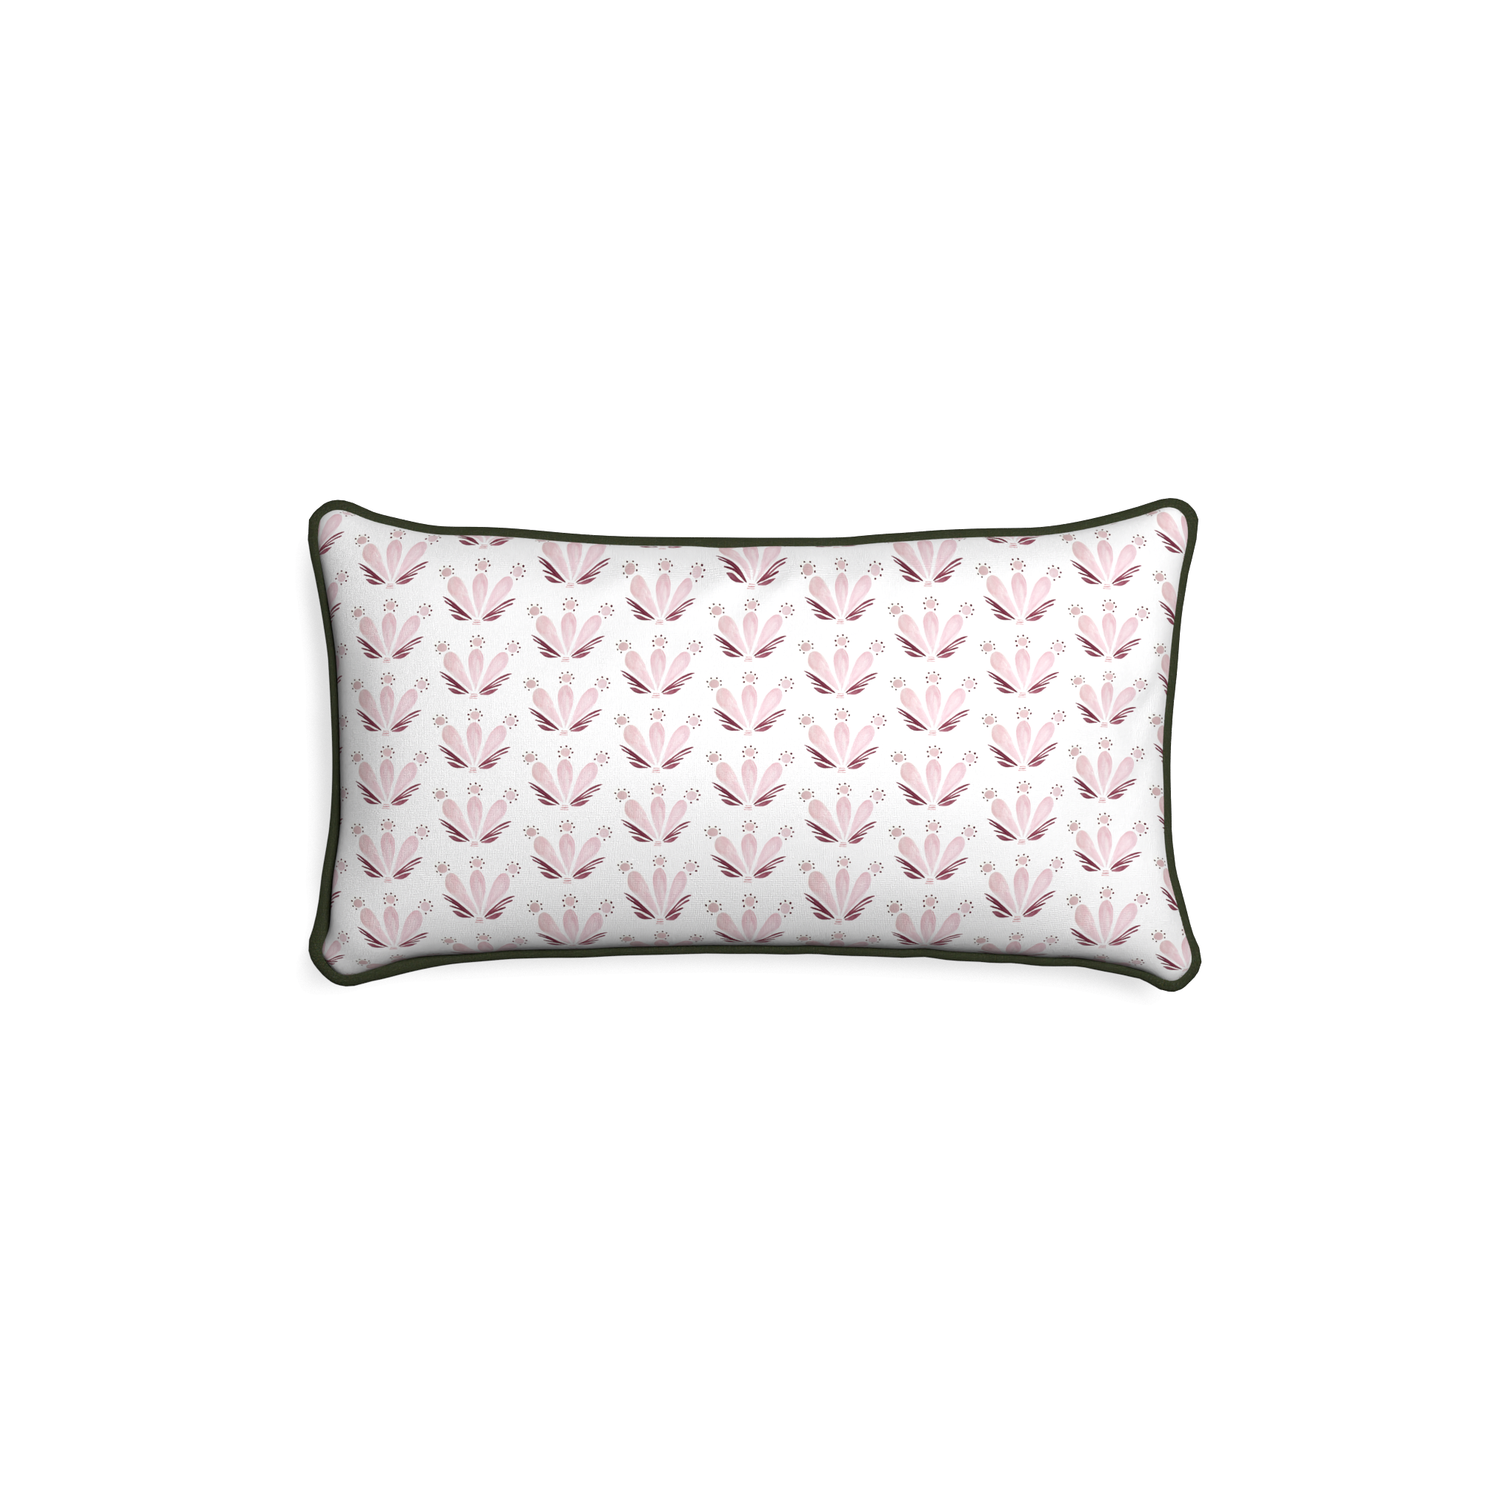 Petite-lumbar serena pink custom pink & burgundy drop repeat floralpillow with f piping on white background